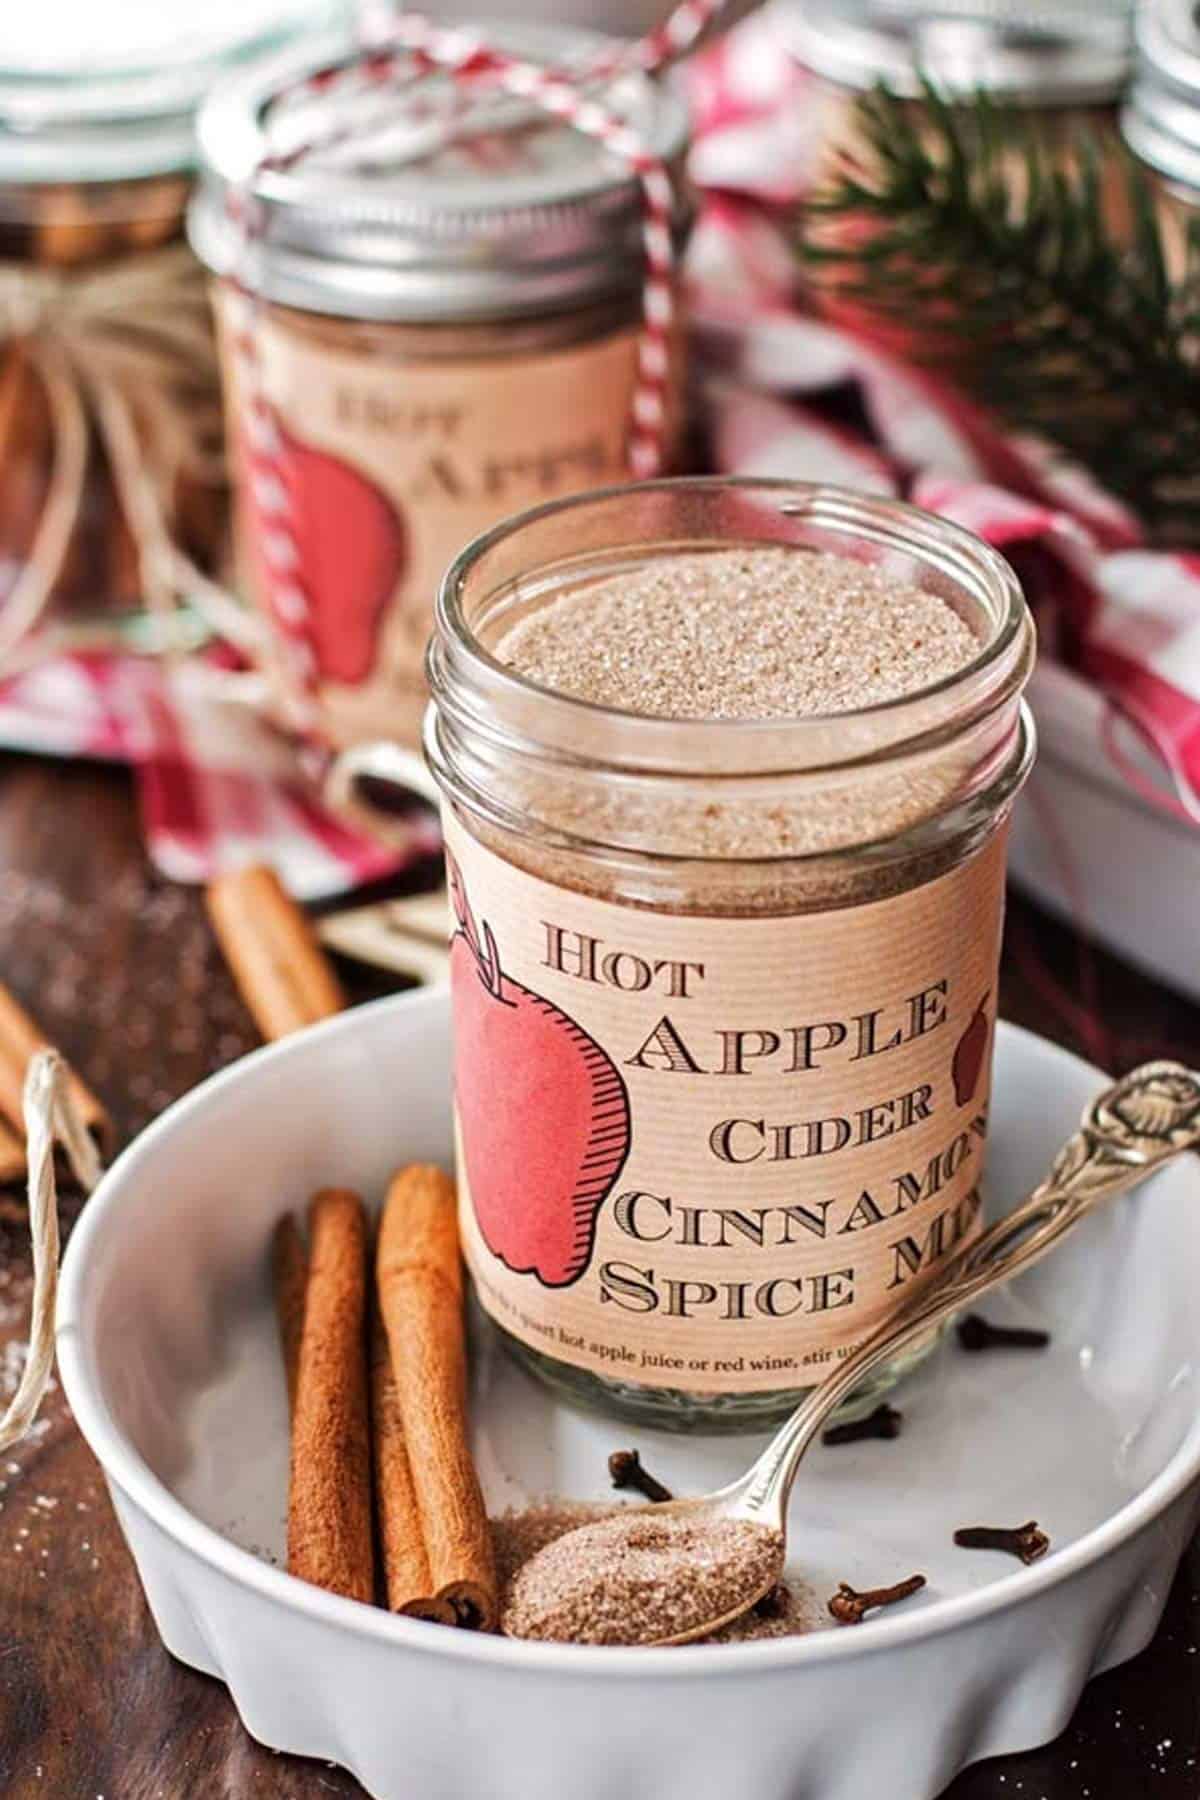 Hot Apple Cider Cinnamon Spice Mix - Easy DIY Holiday Gift